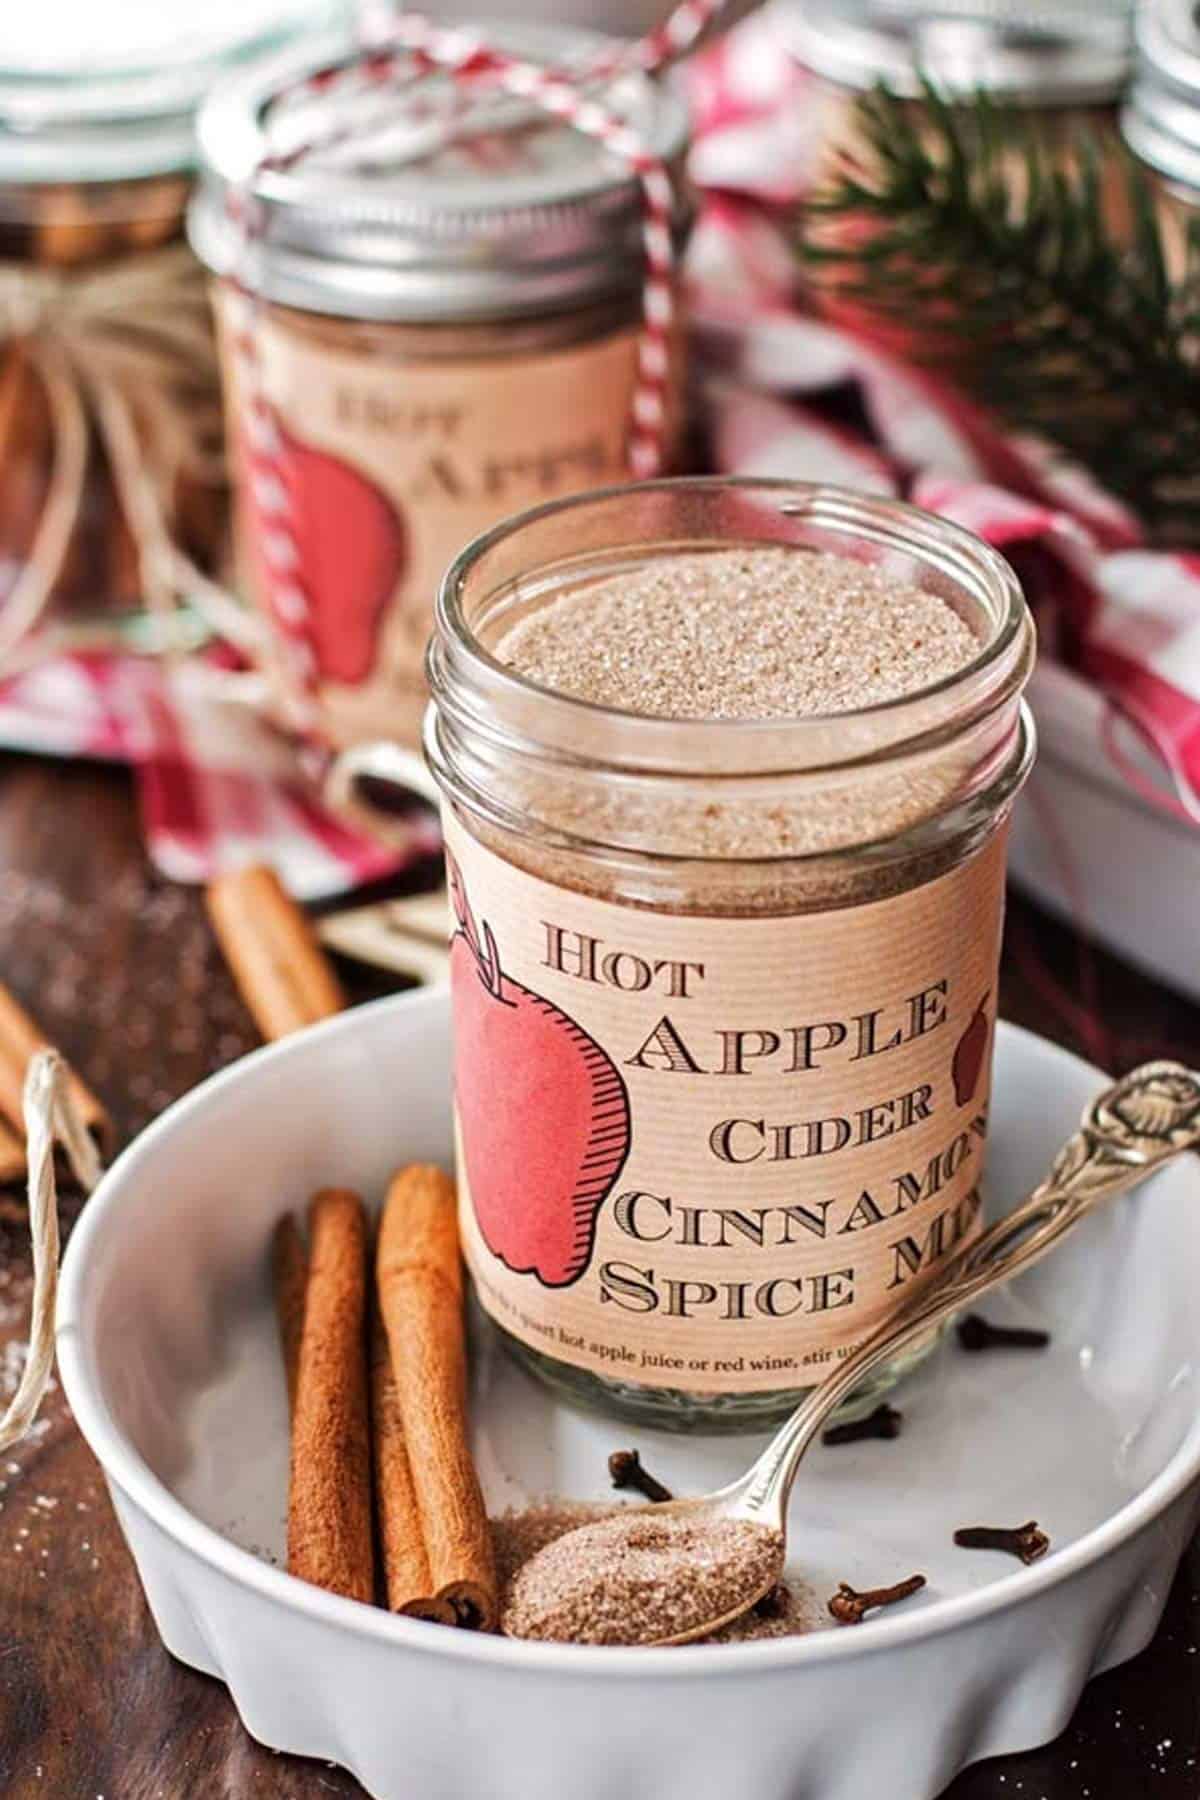 Hot Apple Cider Cinnamon Spice Mix - Easy DIY Holiday Gift